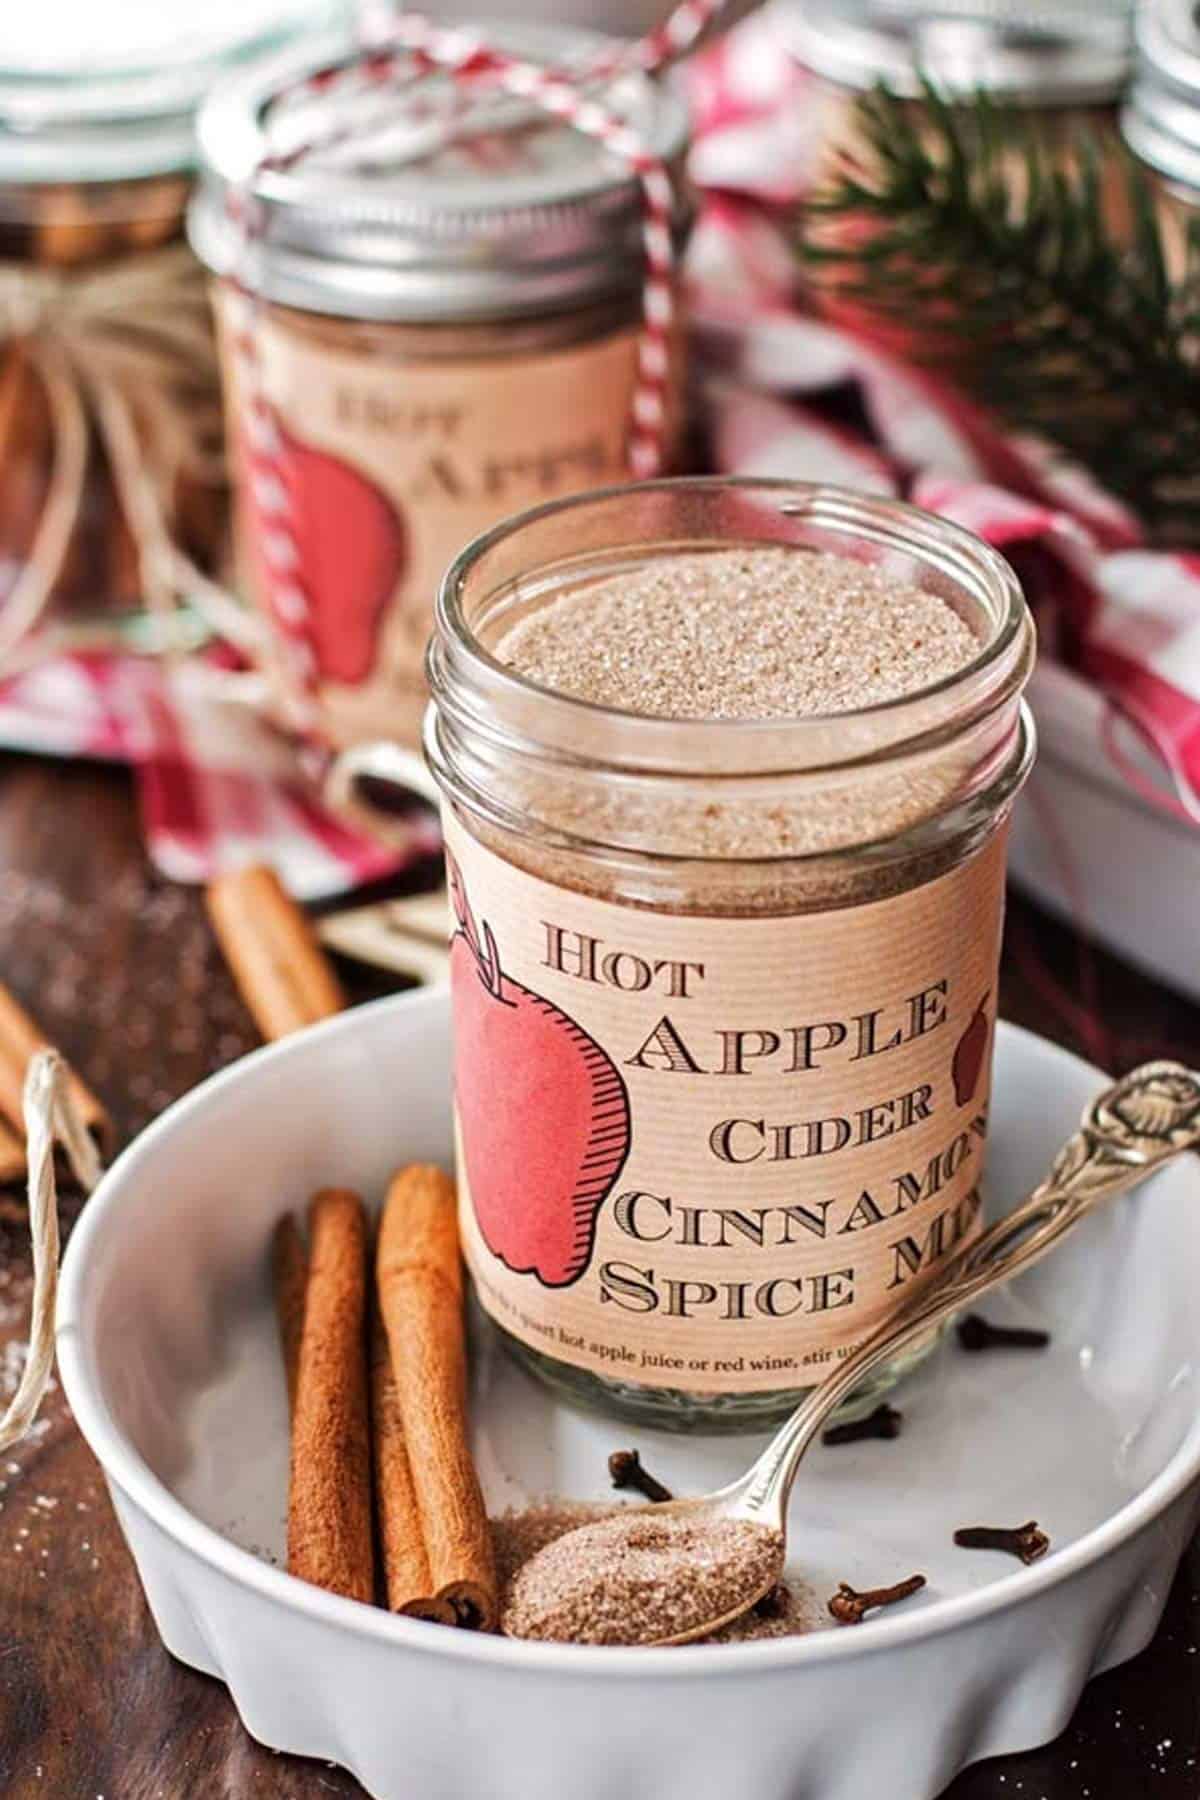 Hot Apple Cider Cinnamon Spice Mix - Easy DIY Holiday Gift